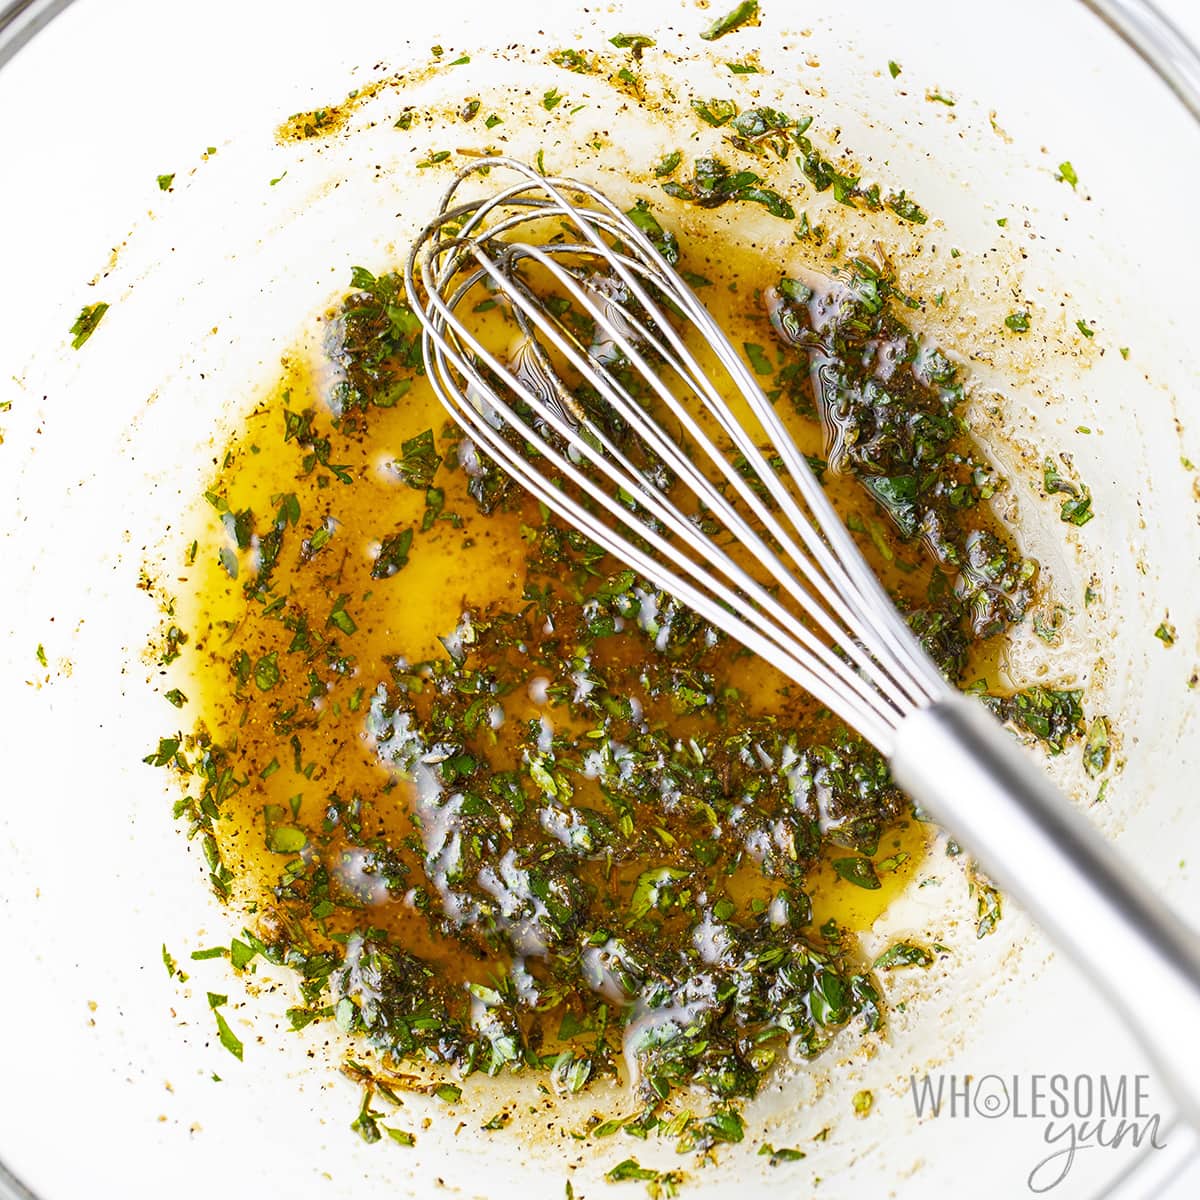 Mushroom marinade mixed in a glass bowl with whisk.